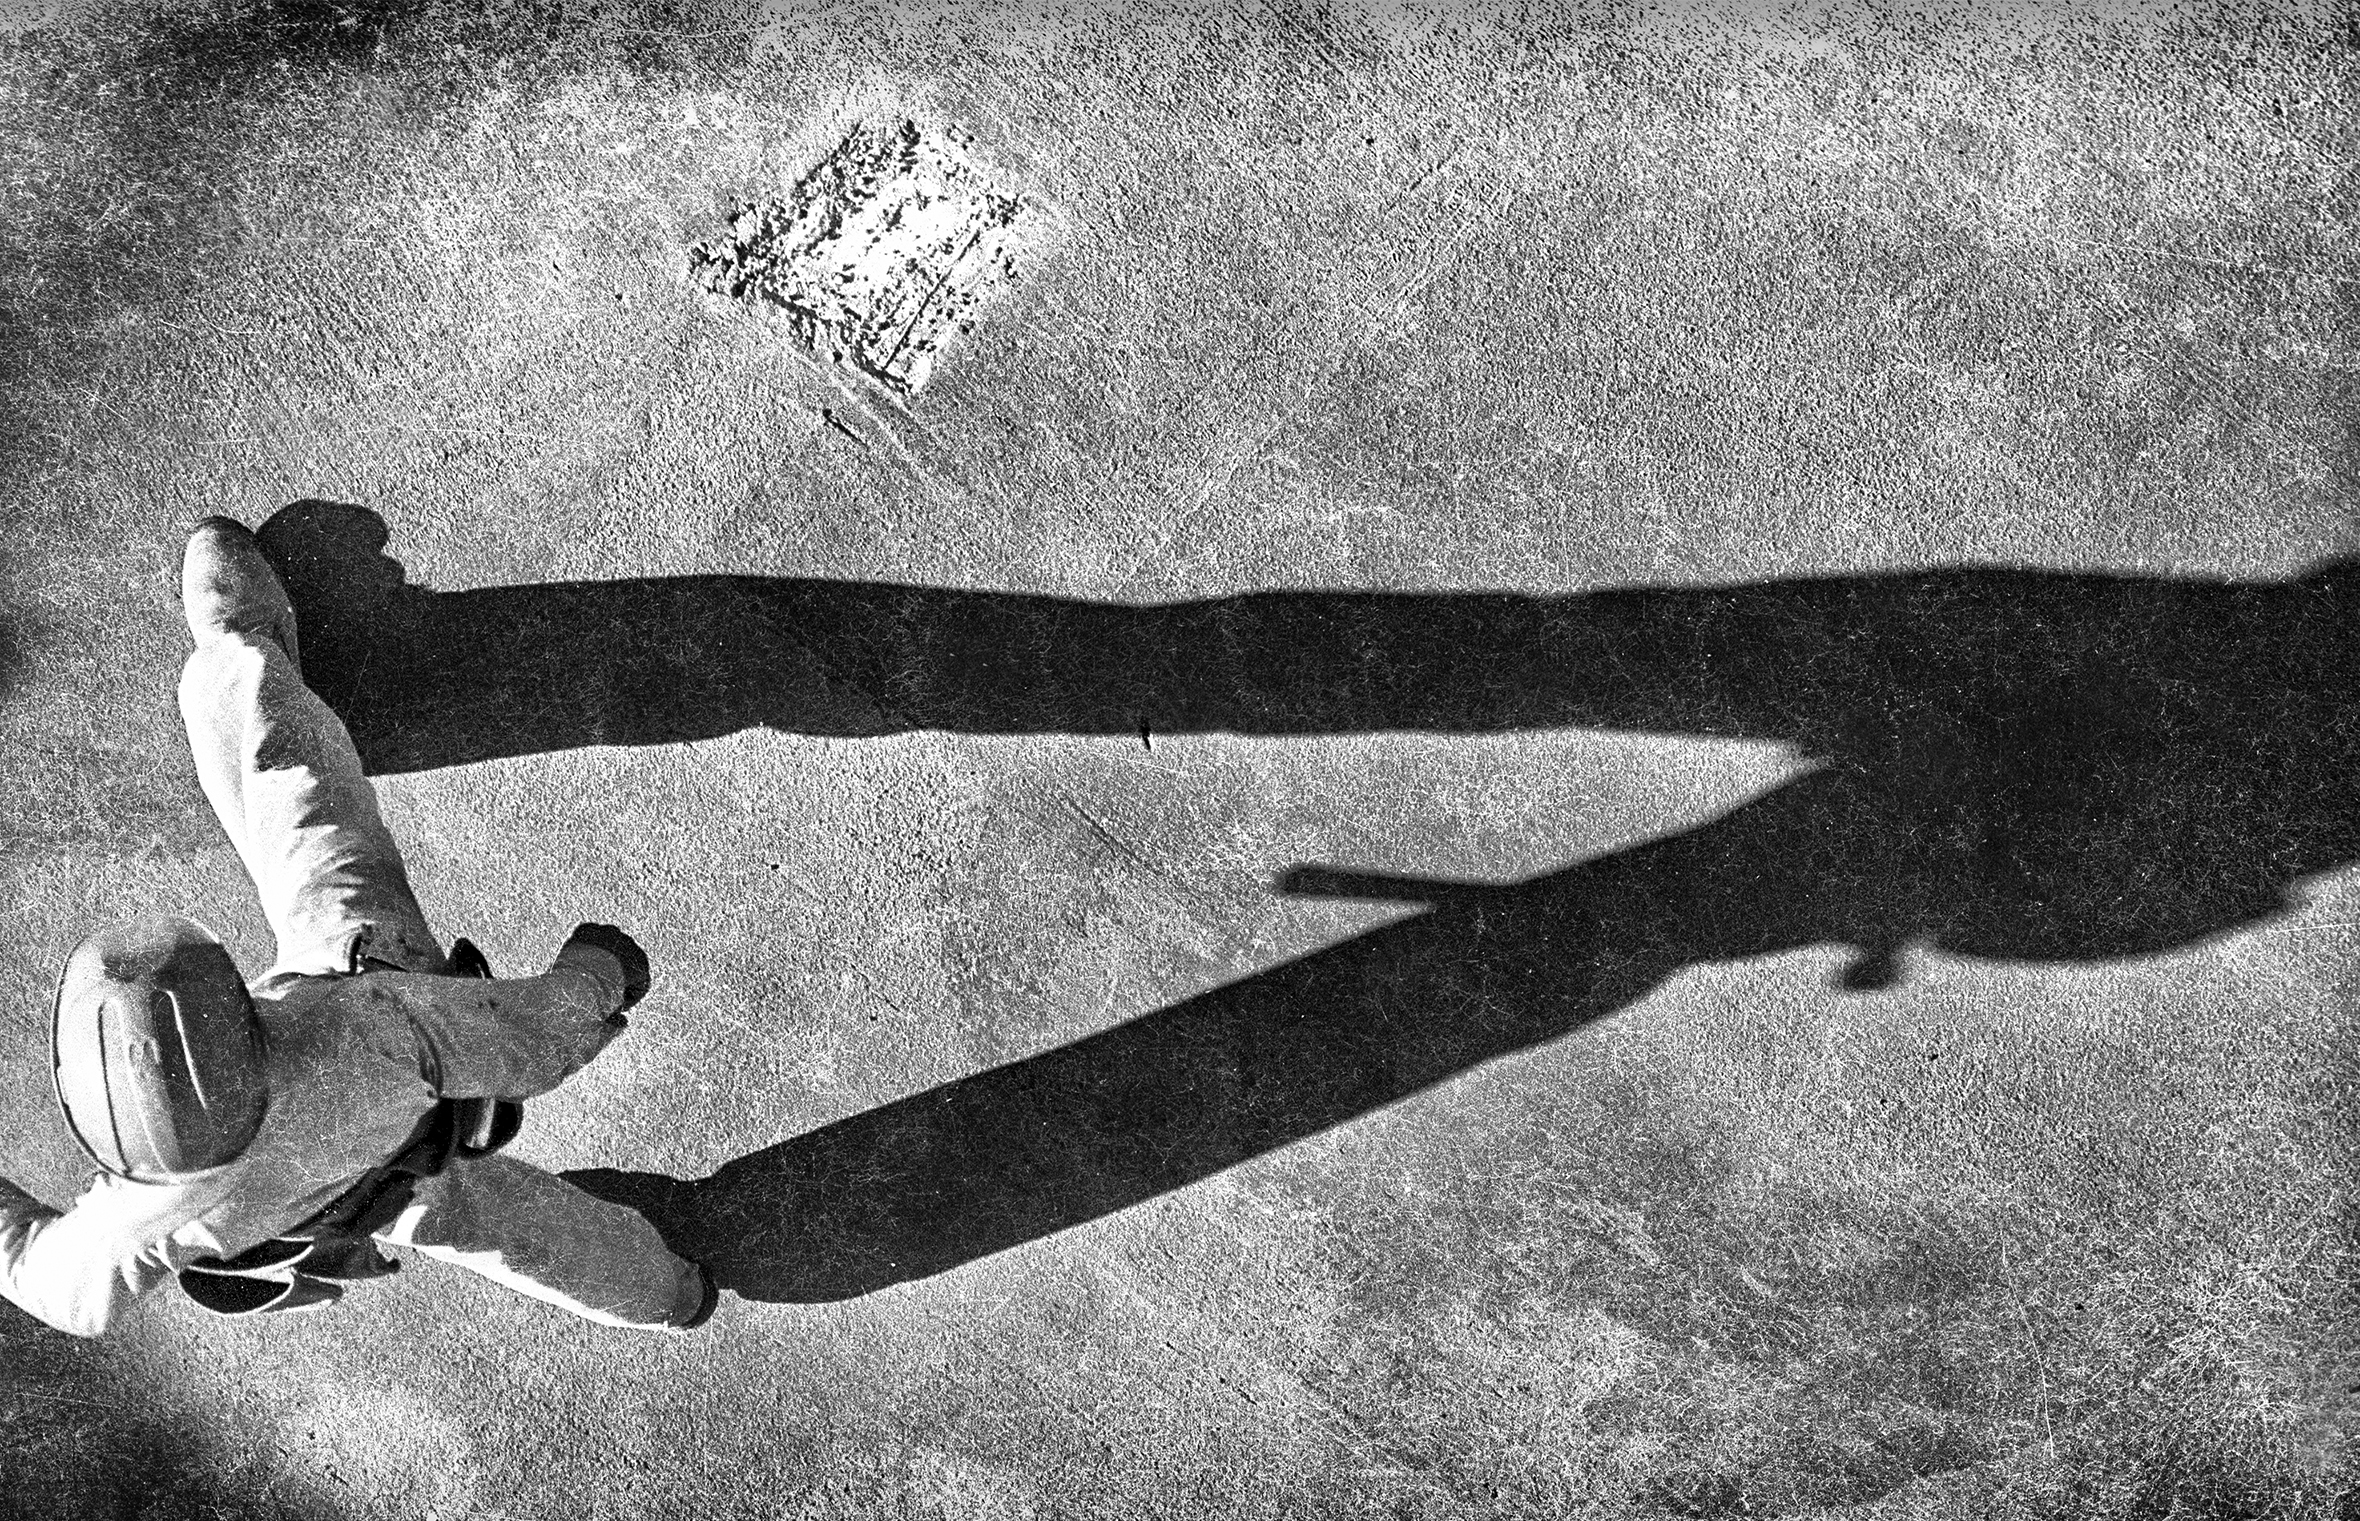 A workman in a hard hat wearing a tool belt is seen from above walking on a concrete floor as his shadow looms large to the right.